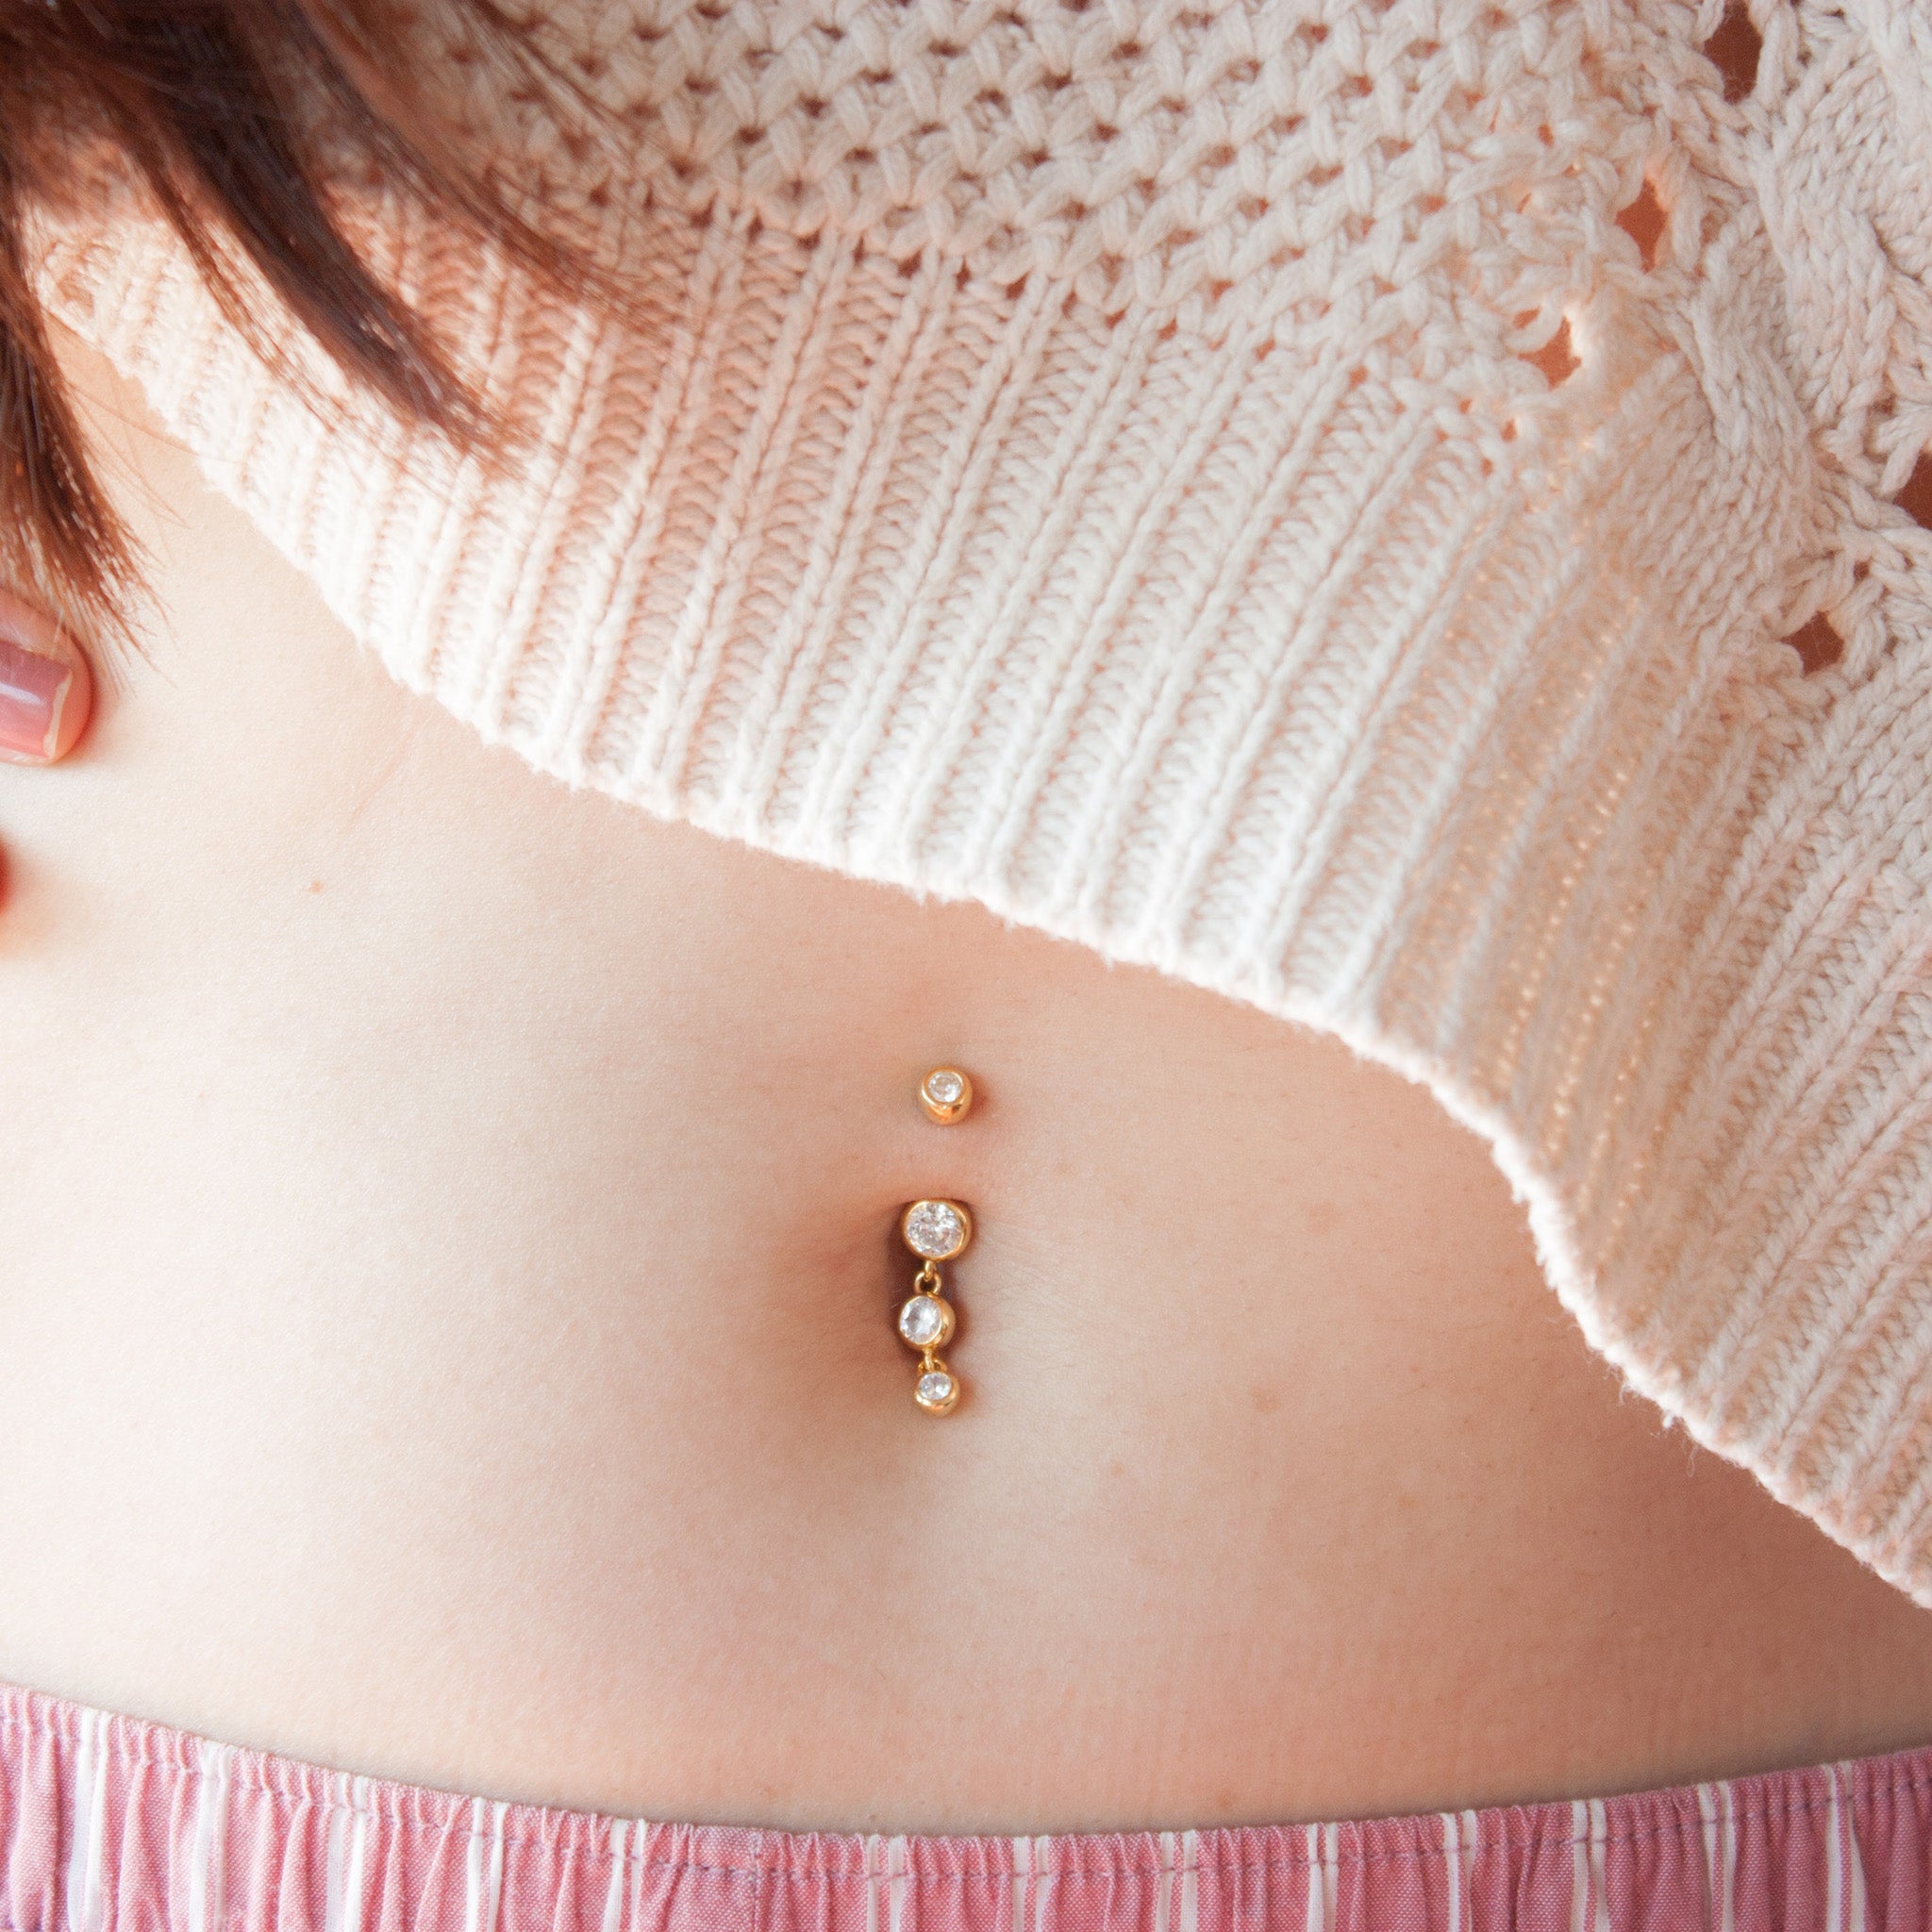 Navel Piercings: Five Things You Might Not Know | NeilMed Piercing Aftercare